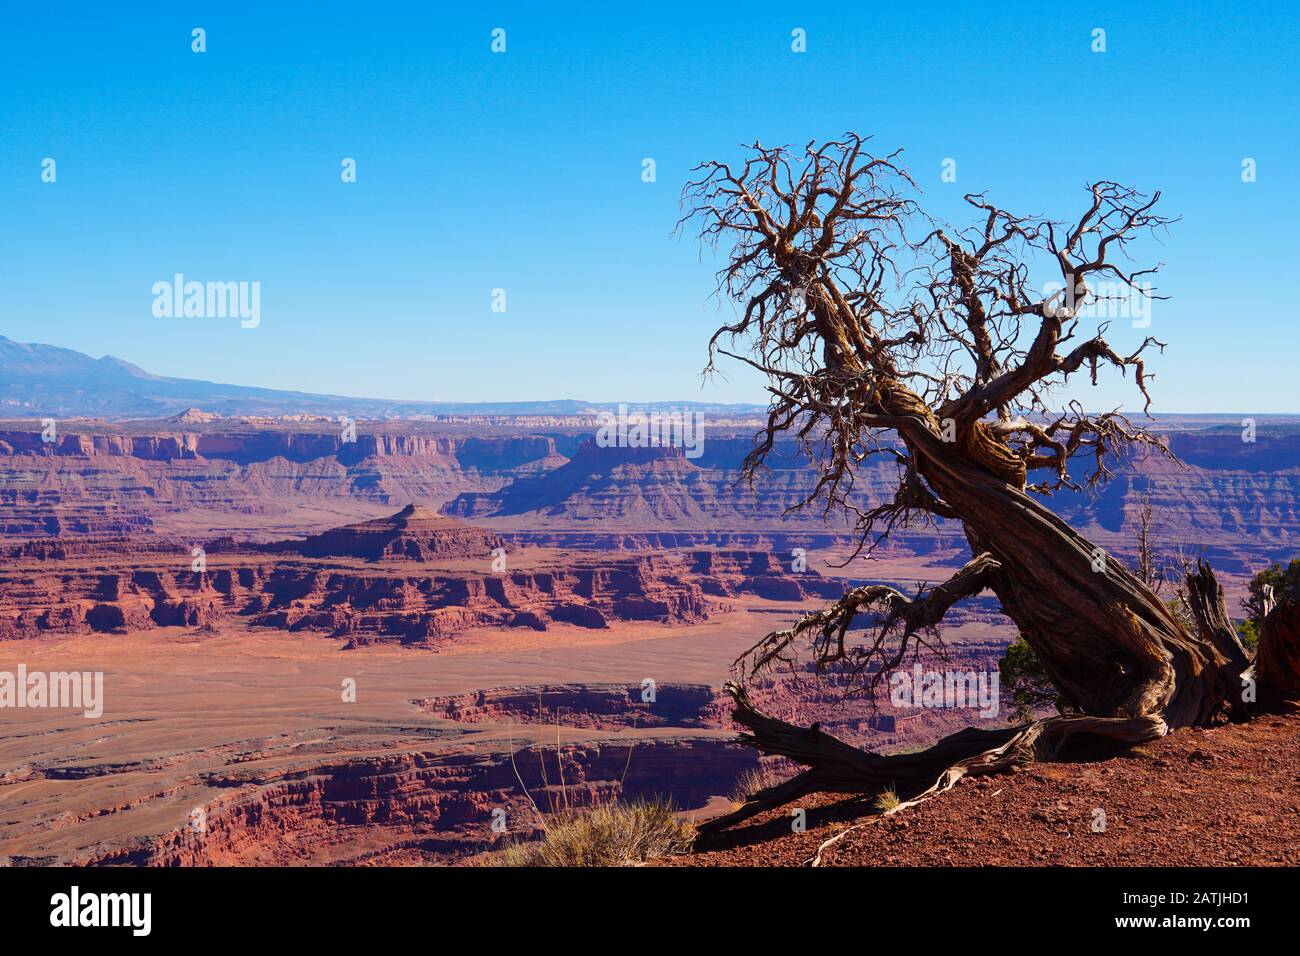 A barren tree stands watch over a beautiful red rock canyon in Dead Horse Point State Park. Stock Photo